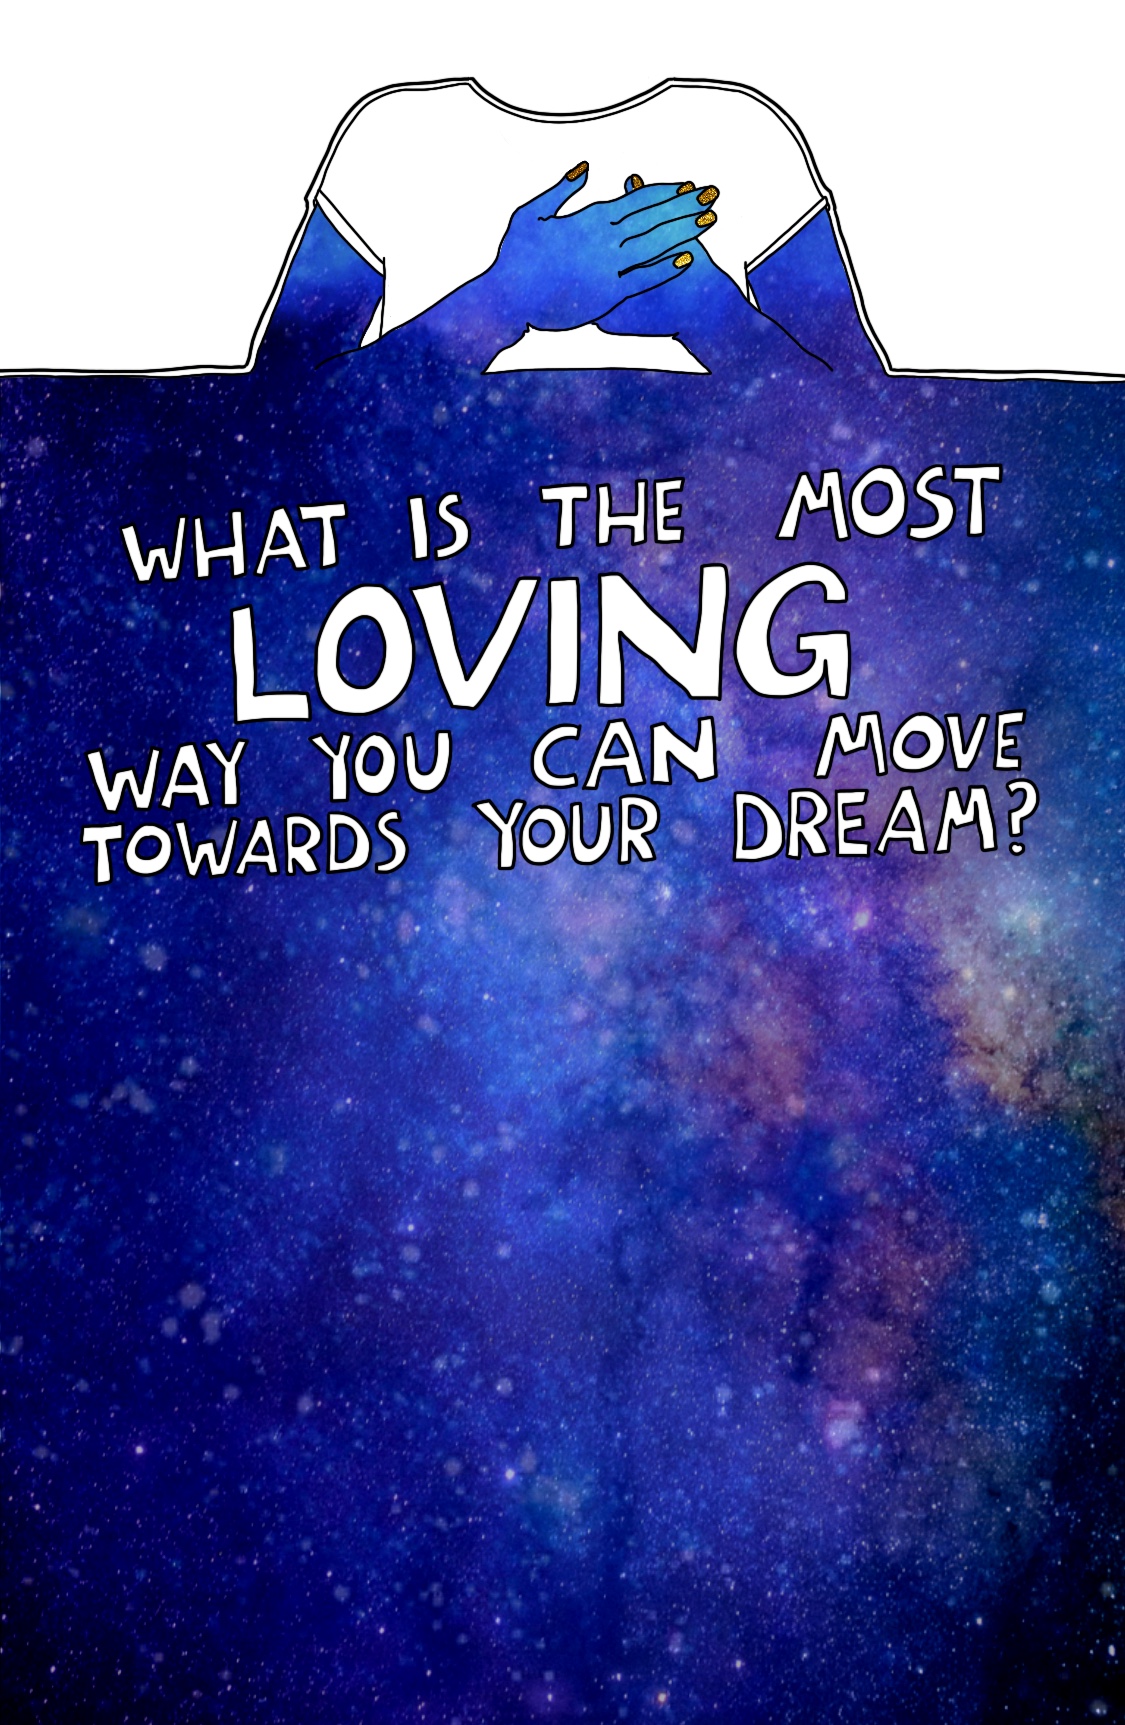 Journal Prompt: What is the most loving way you can move towards your dream?